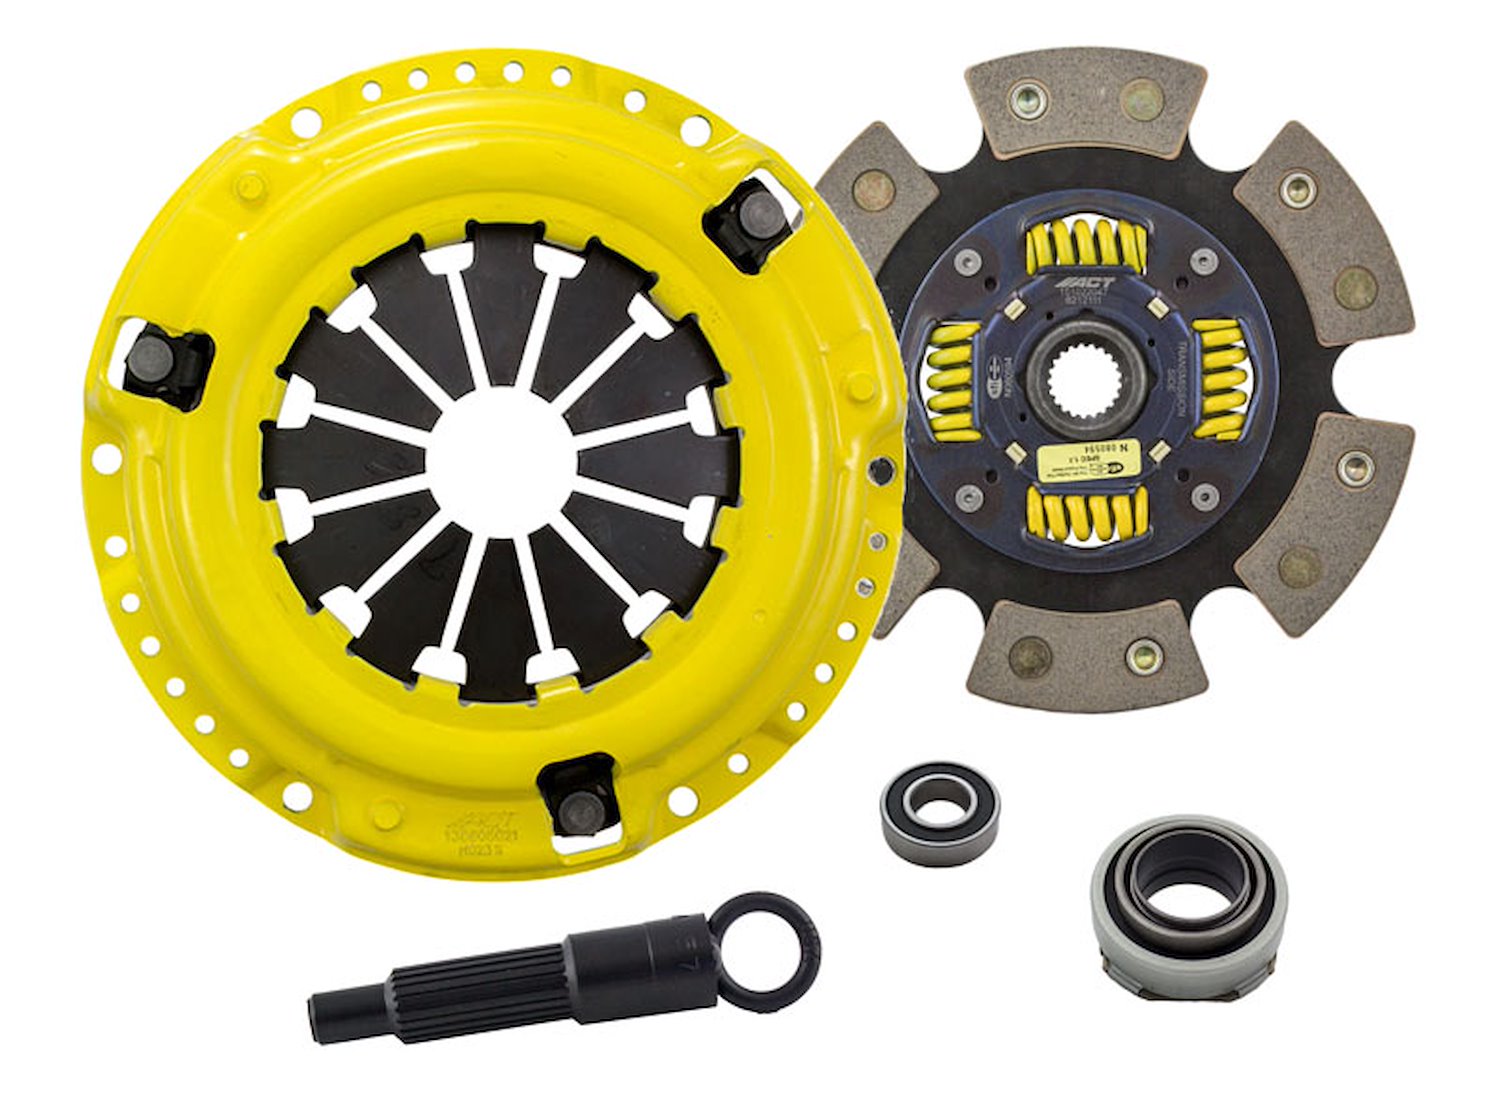 Sport/Race Sprung 6-Pad Transmission Clutch Kit Fits Select Acura/Honda